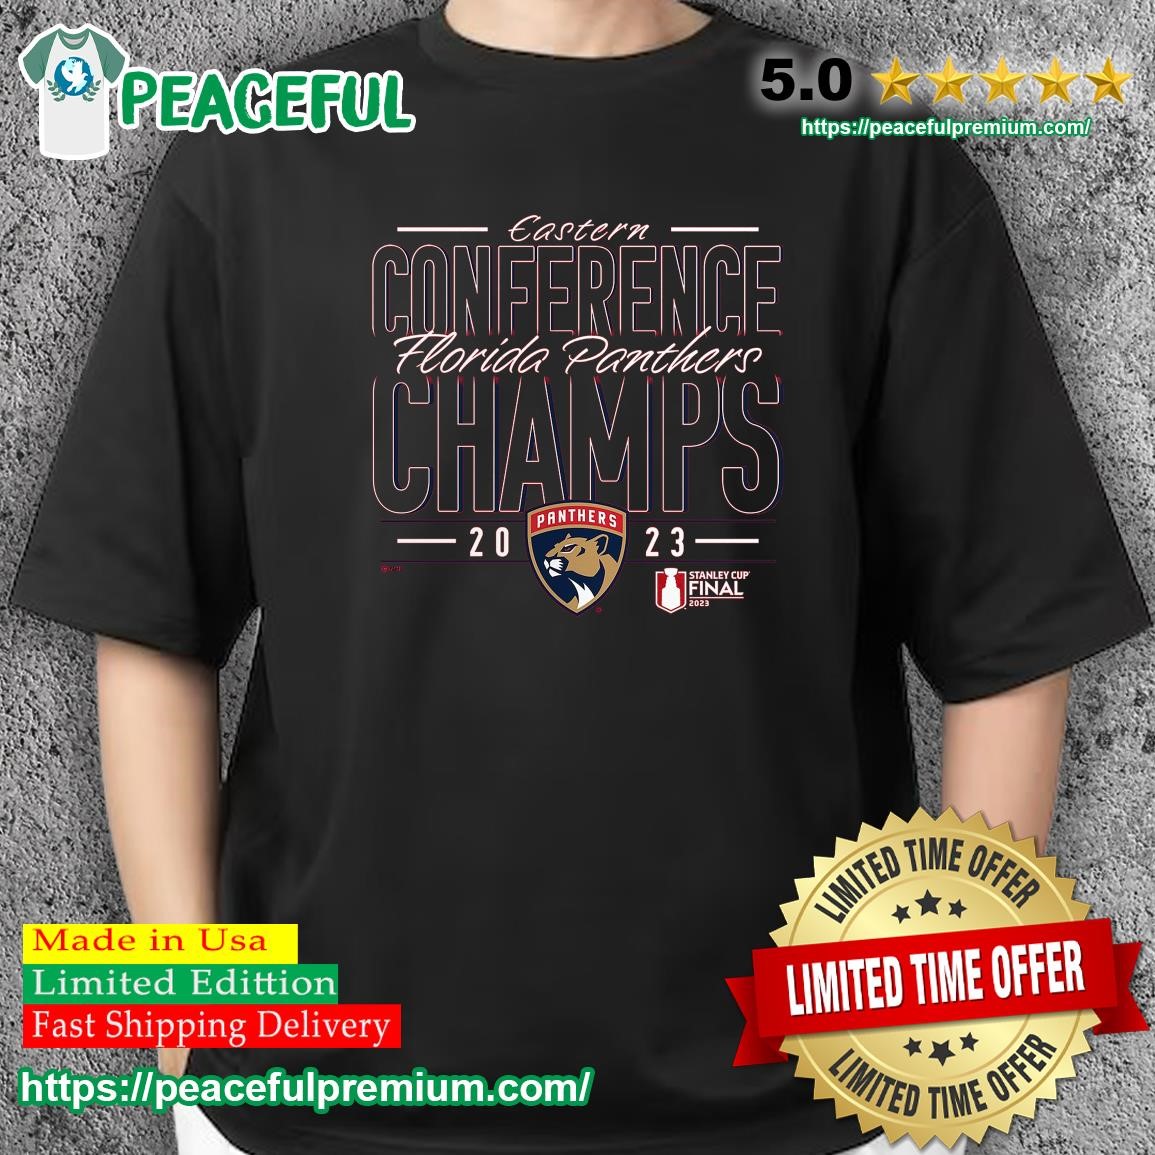 Florida Panthers 2023 Eastern Conference Champions logo T-shirt